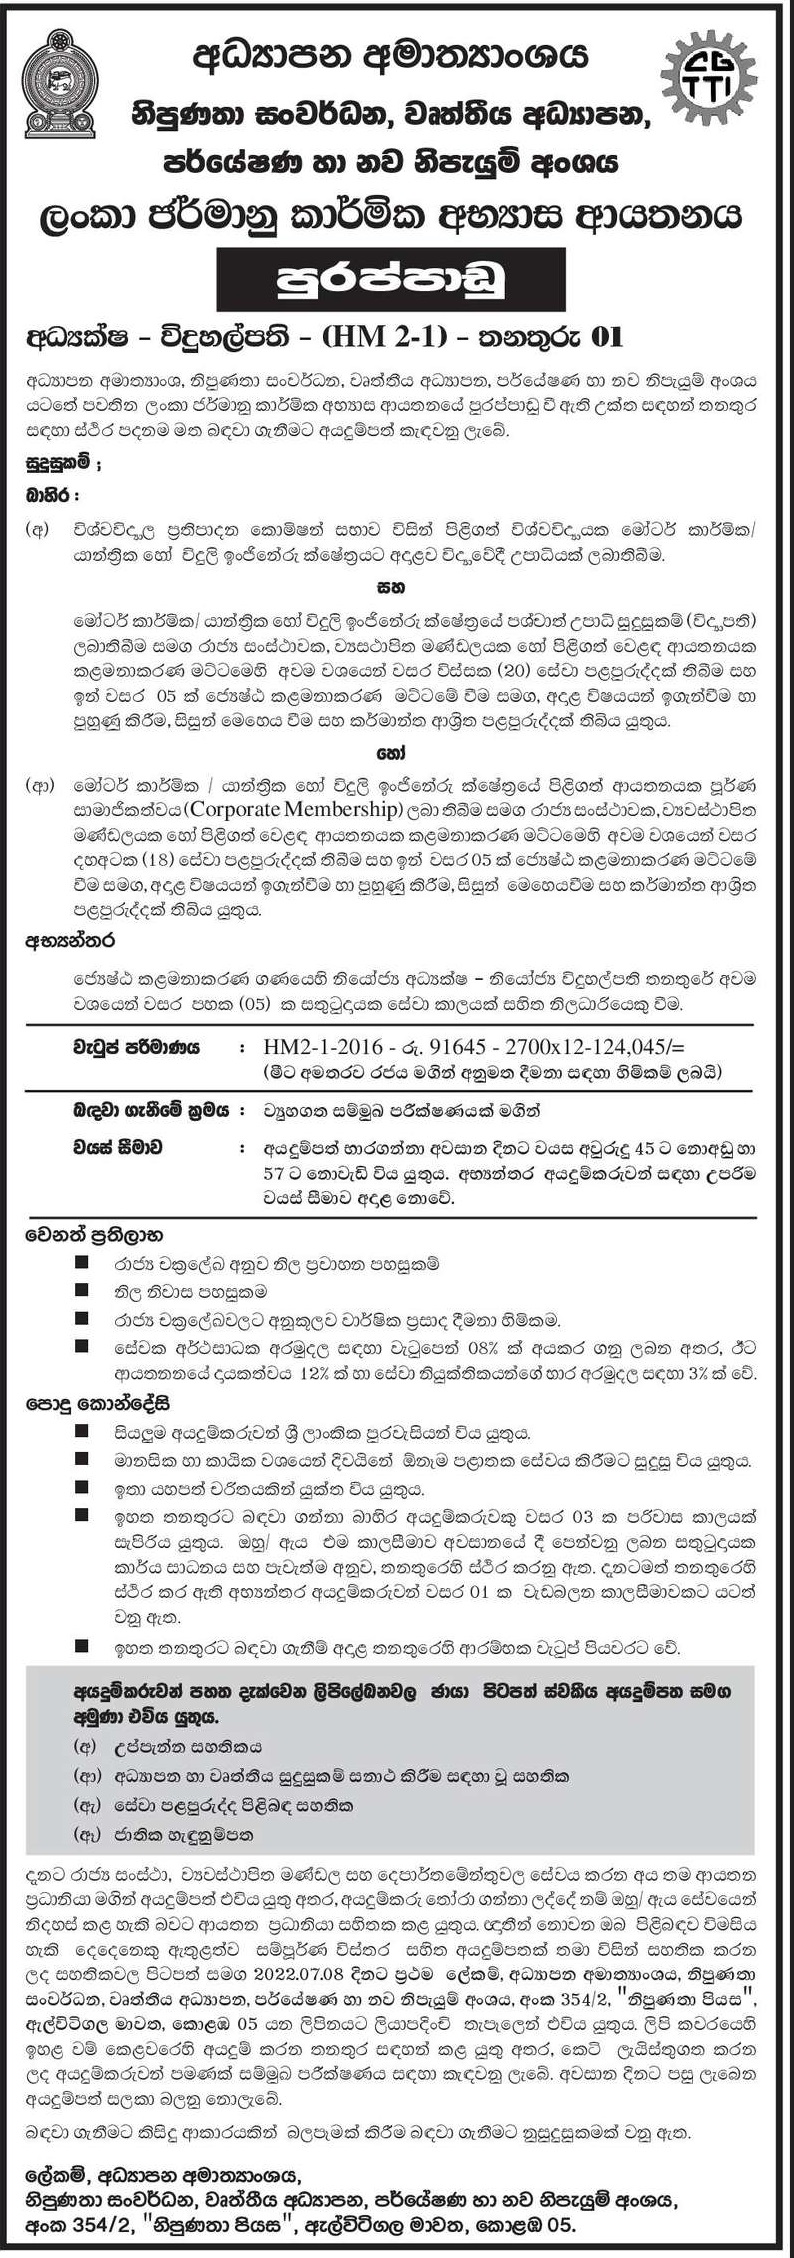 Director - Principal - Ministry of Education